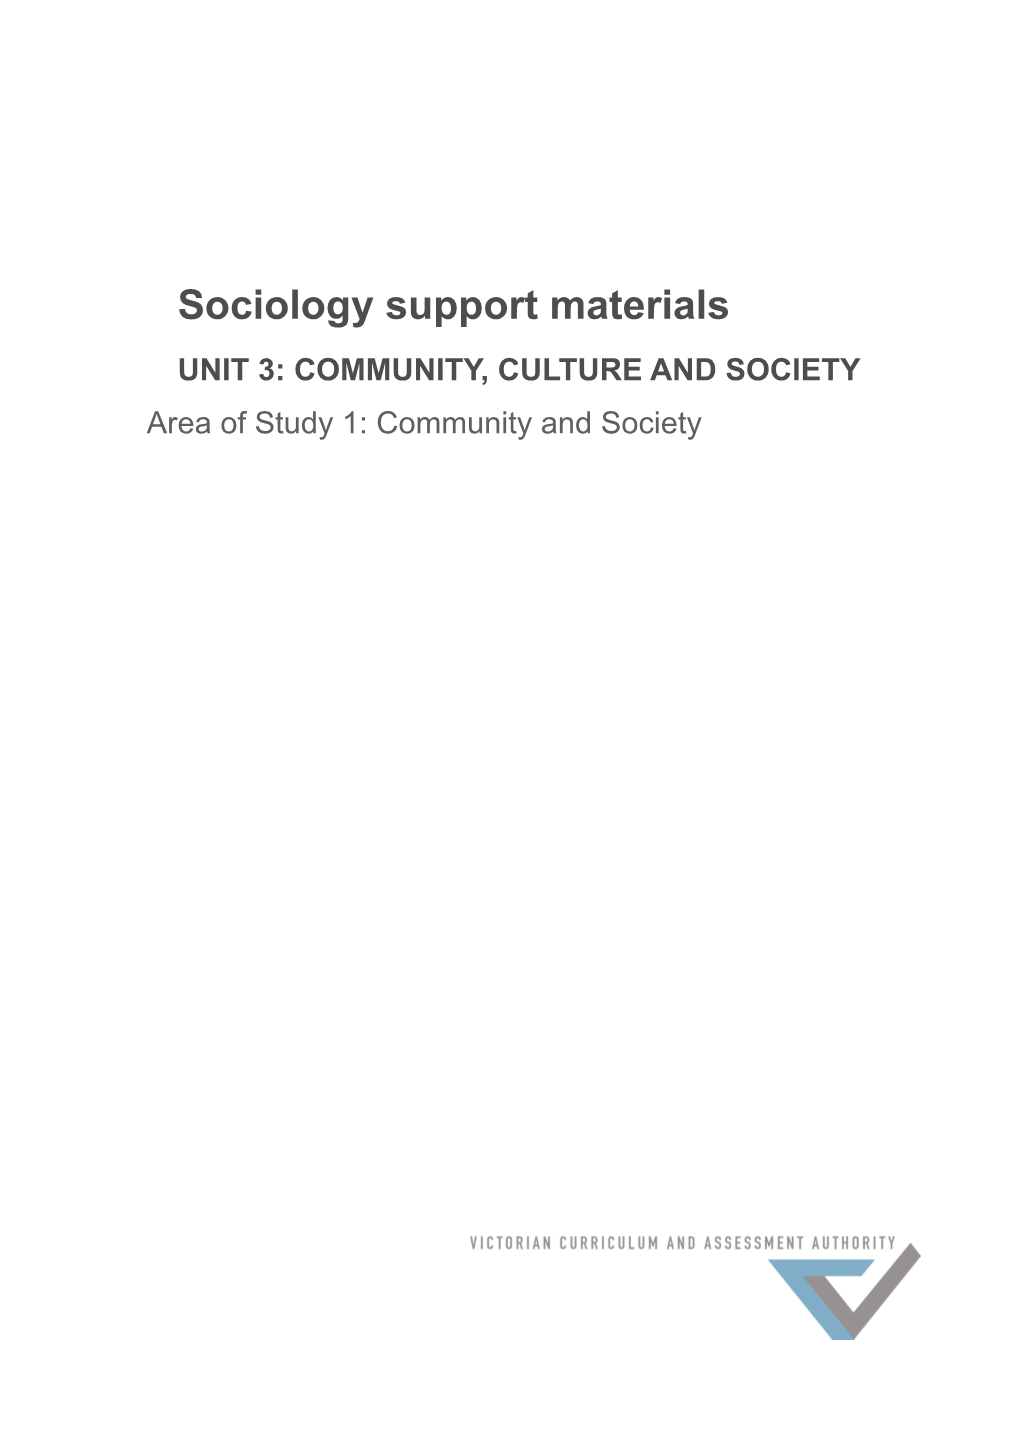 Unit 3: Community, Culture and Society